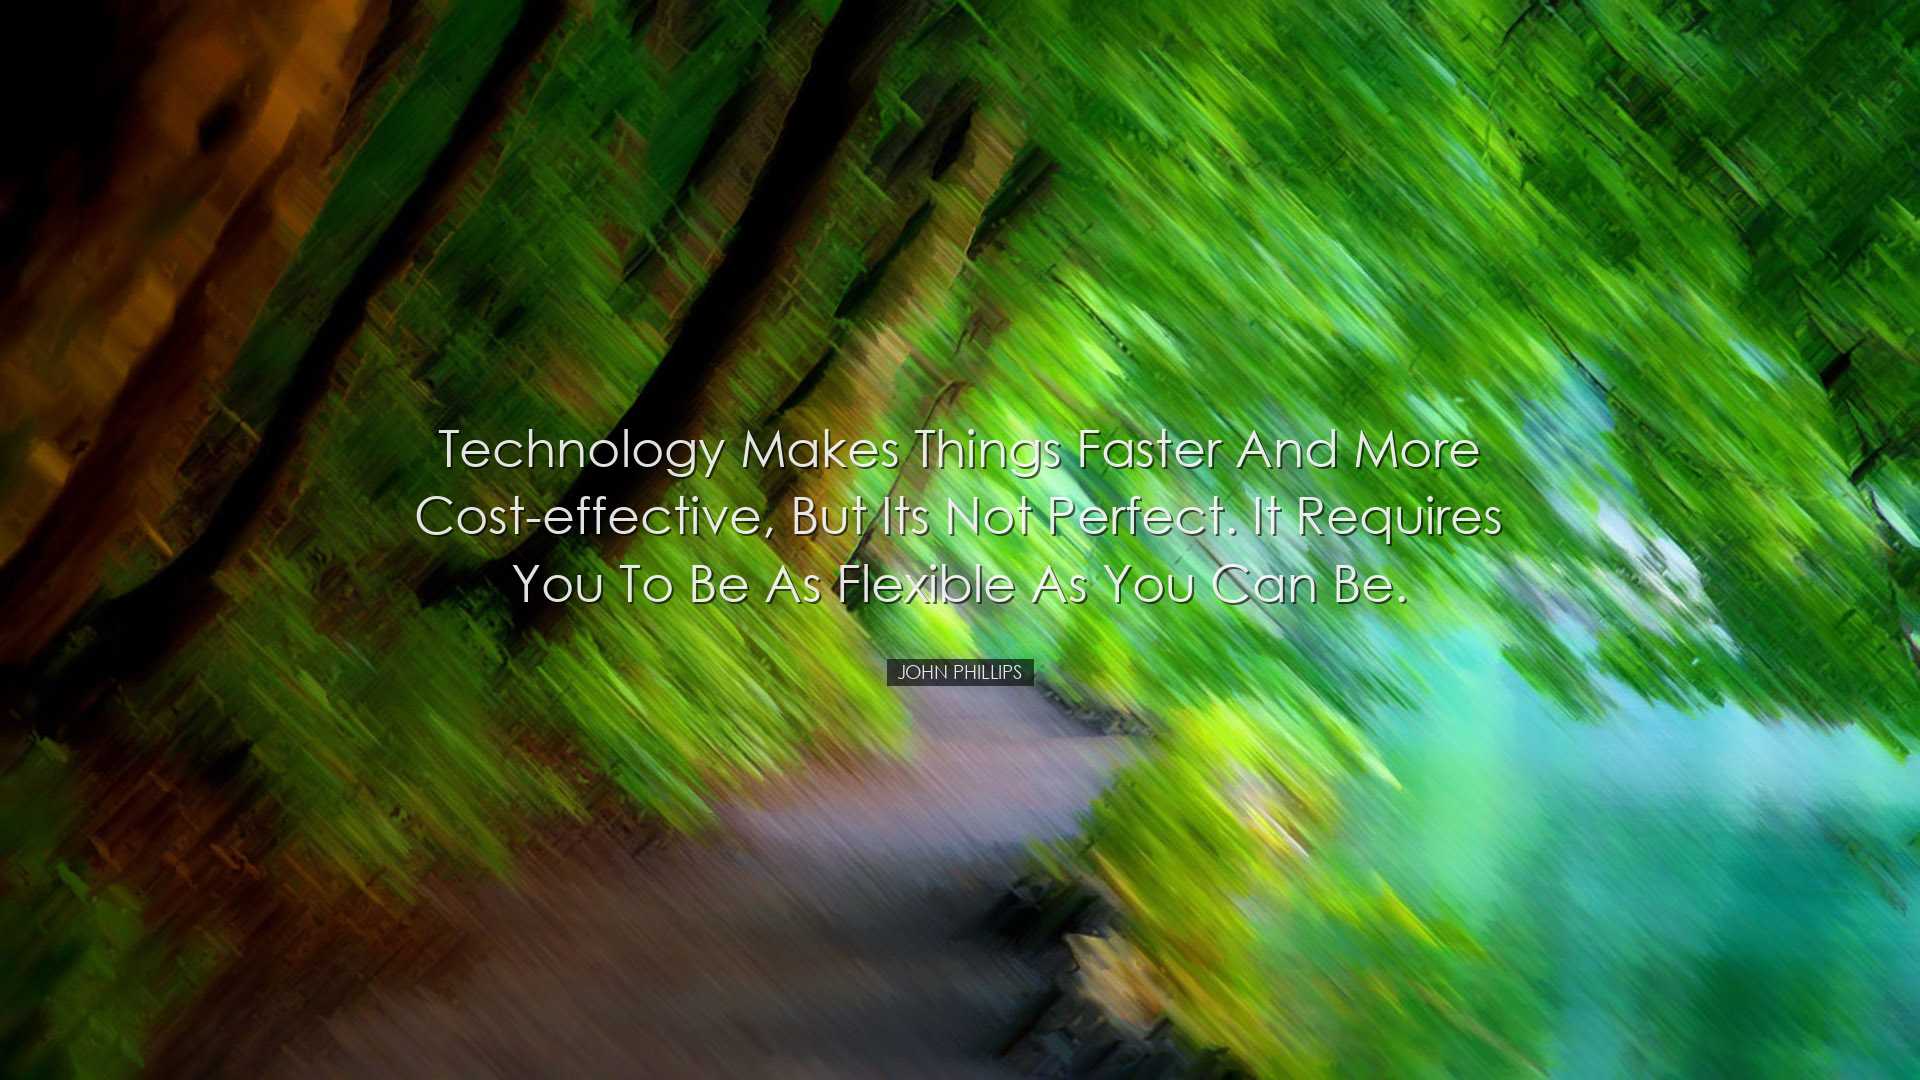 Technology makes things faster and more cost-effective, but its no